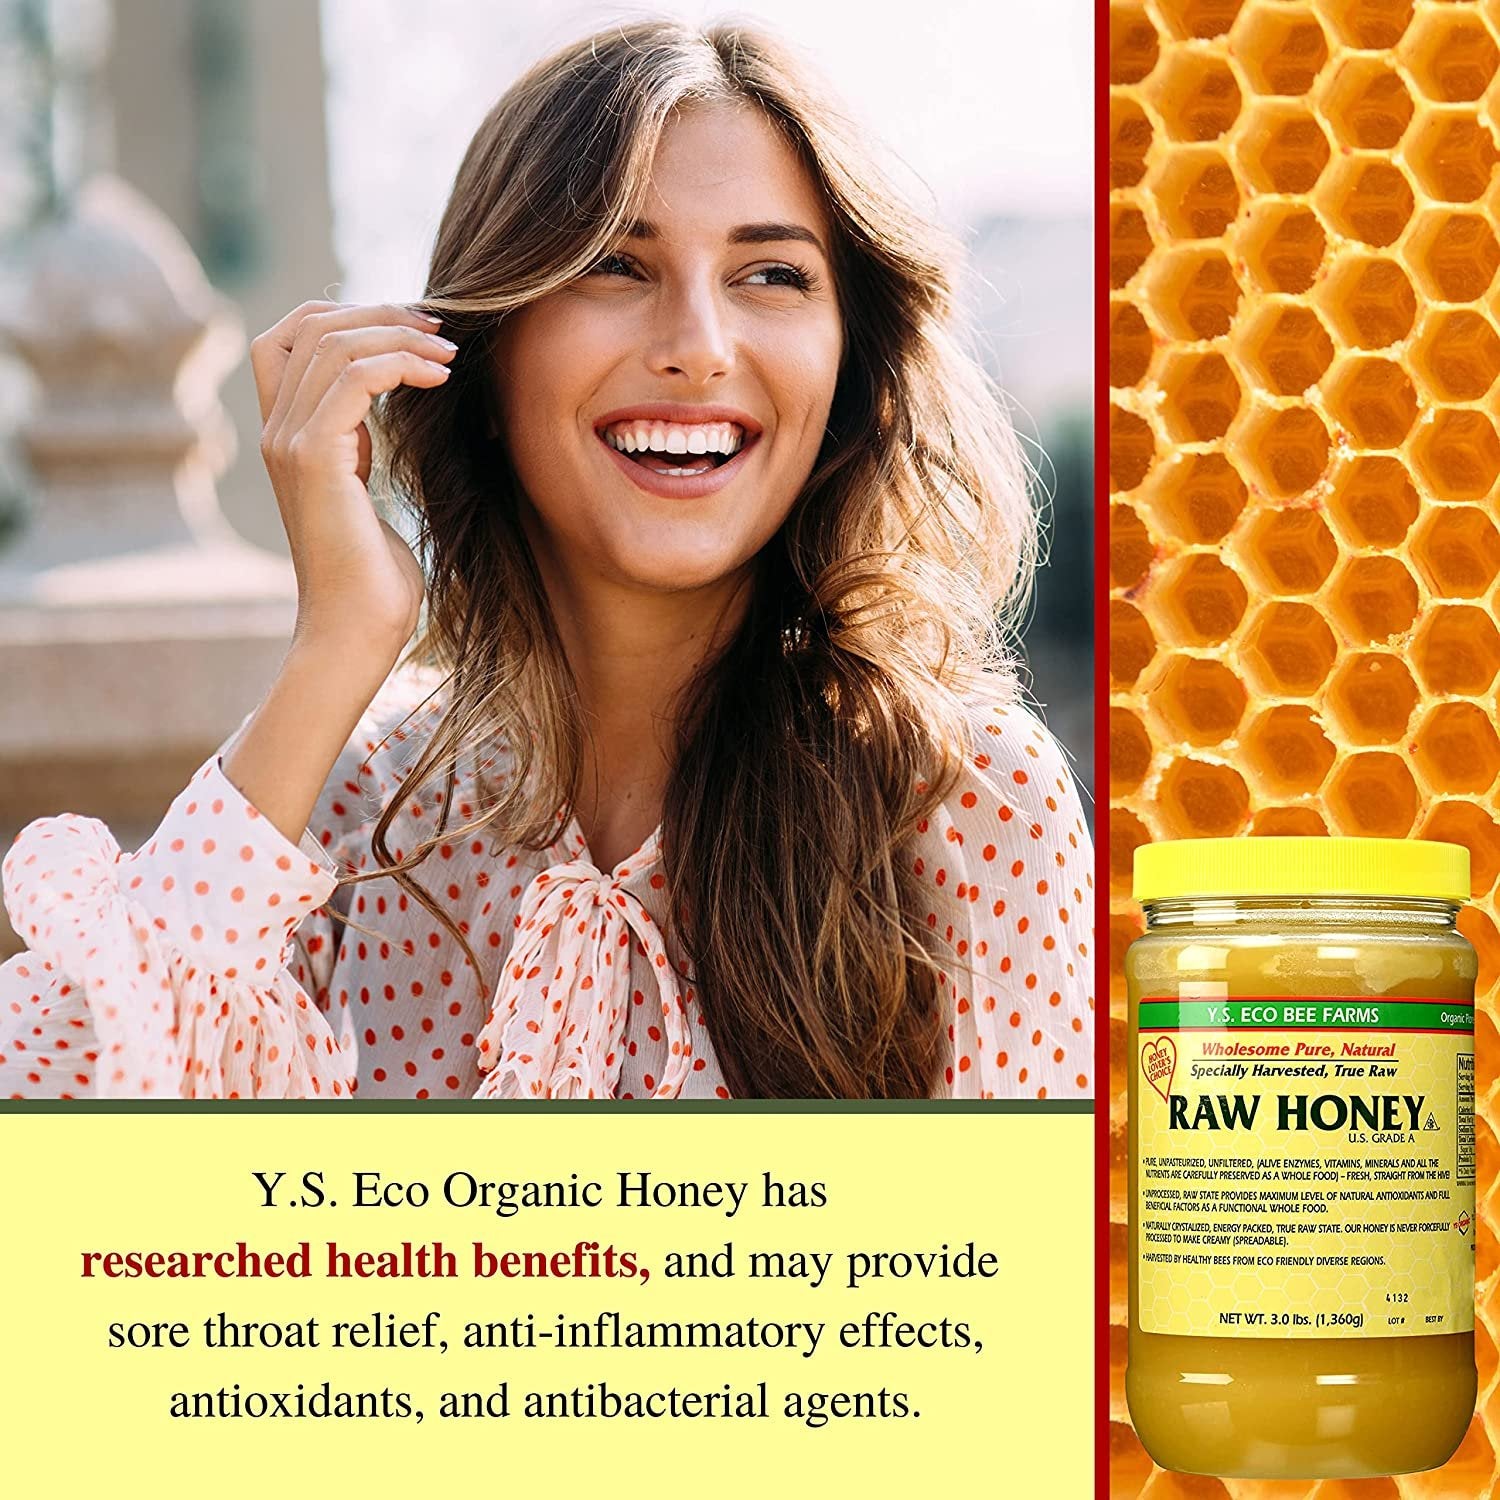 Y.S. Eco Bee Farms, Wholesome Natural Raw Honey, Unpasteurized, Unfiltered, Fresh Raw State, Kosher, Pure, Natural, Healthy, Safe, Gluten Free, Specially Harvested, 3lb - with Bonus Key Chain